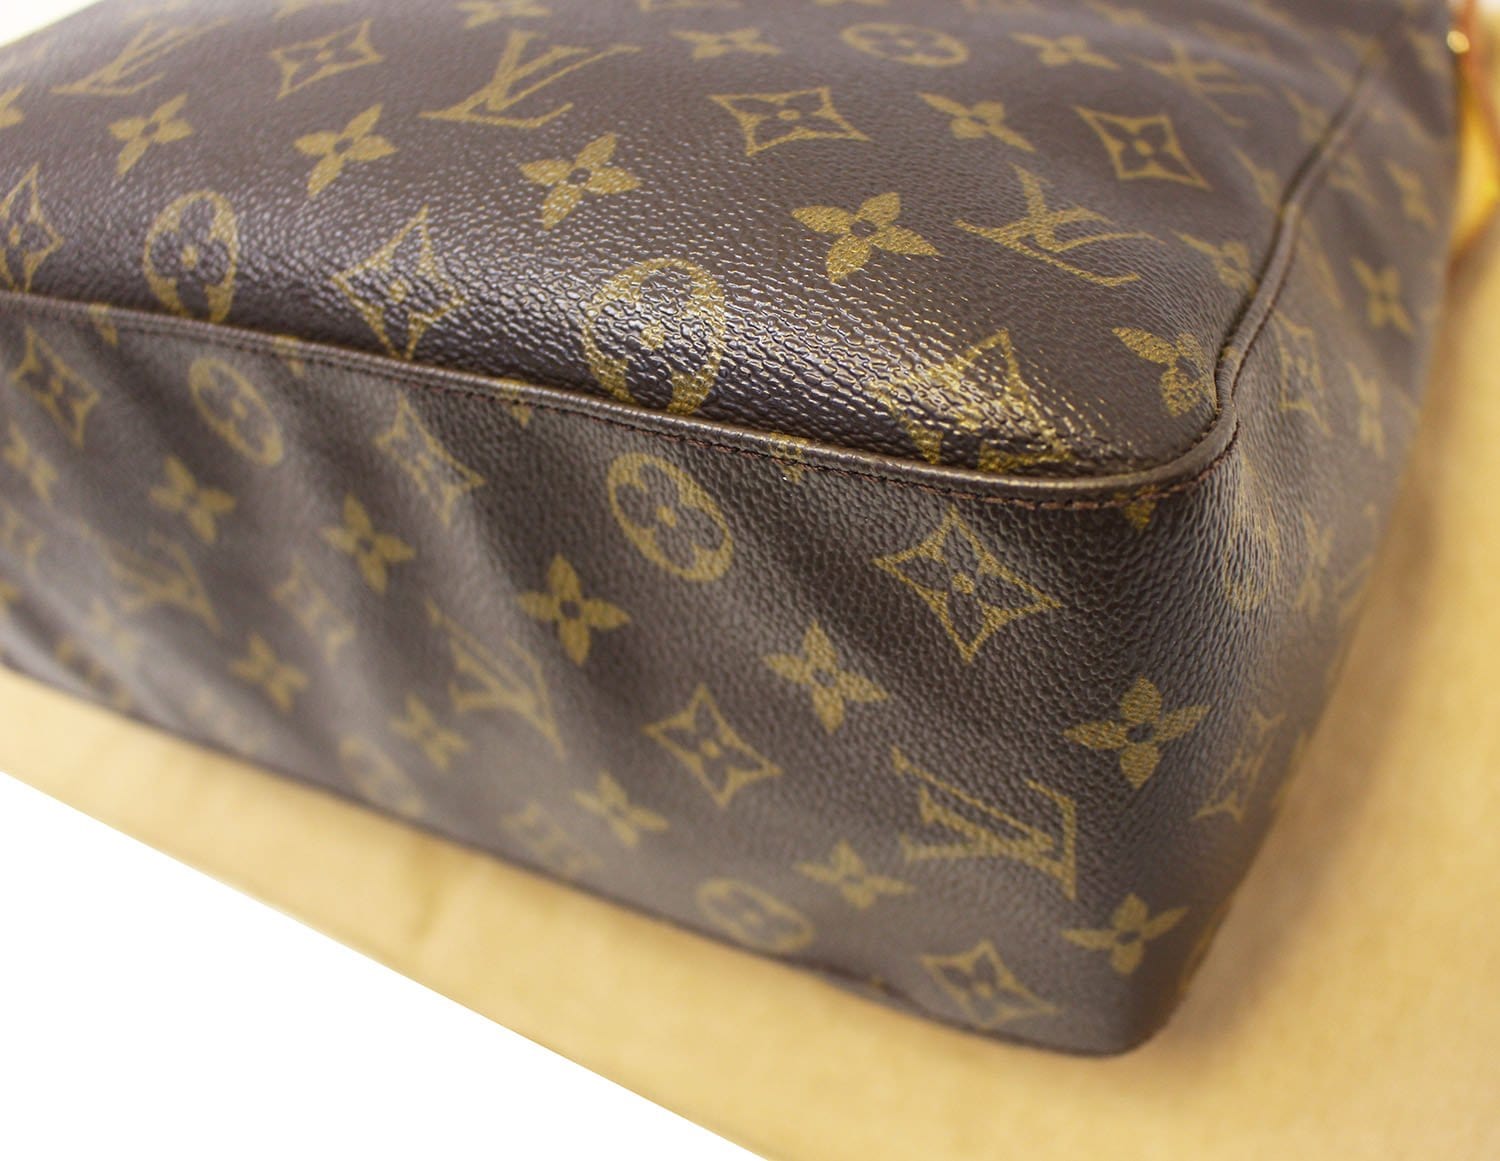 Authenticated Used Louis Vuitton Shoulder Bag Looping Brown Monogram M51145  MI0020 LOUIS VUITTON LV Tote Rectangle One Handle 